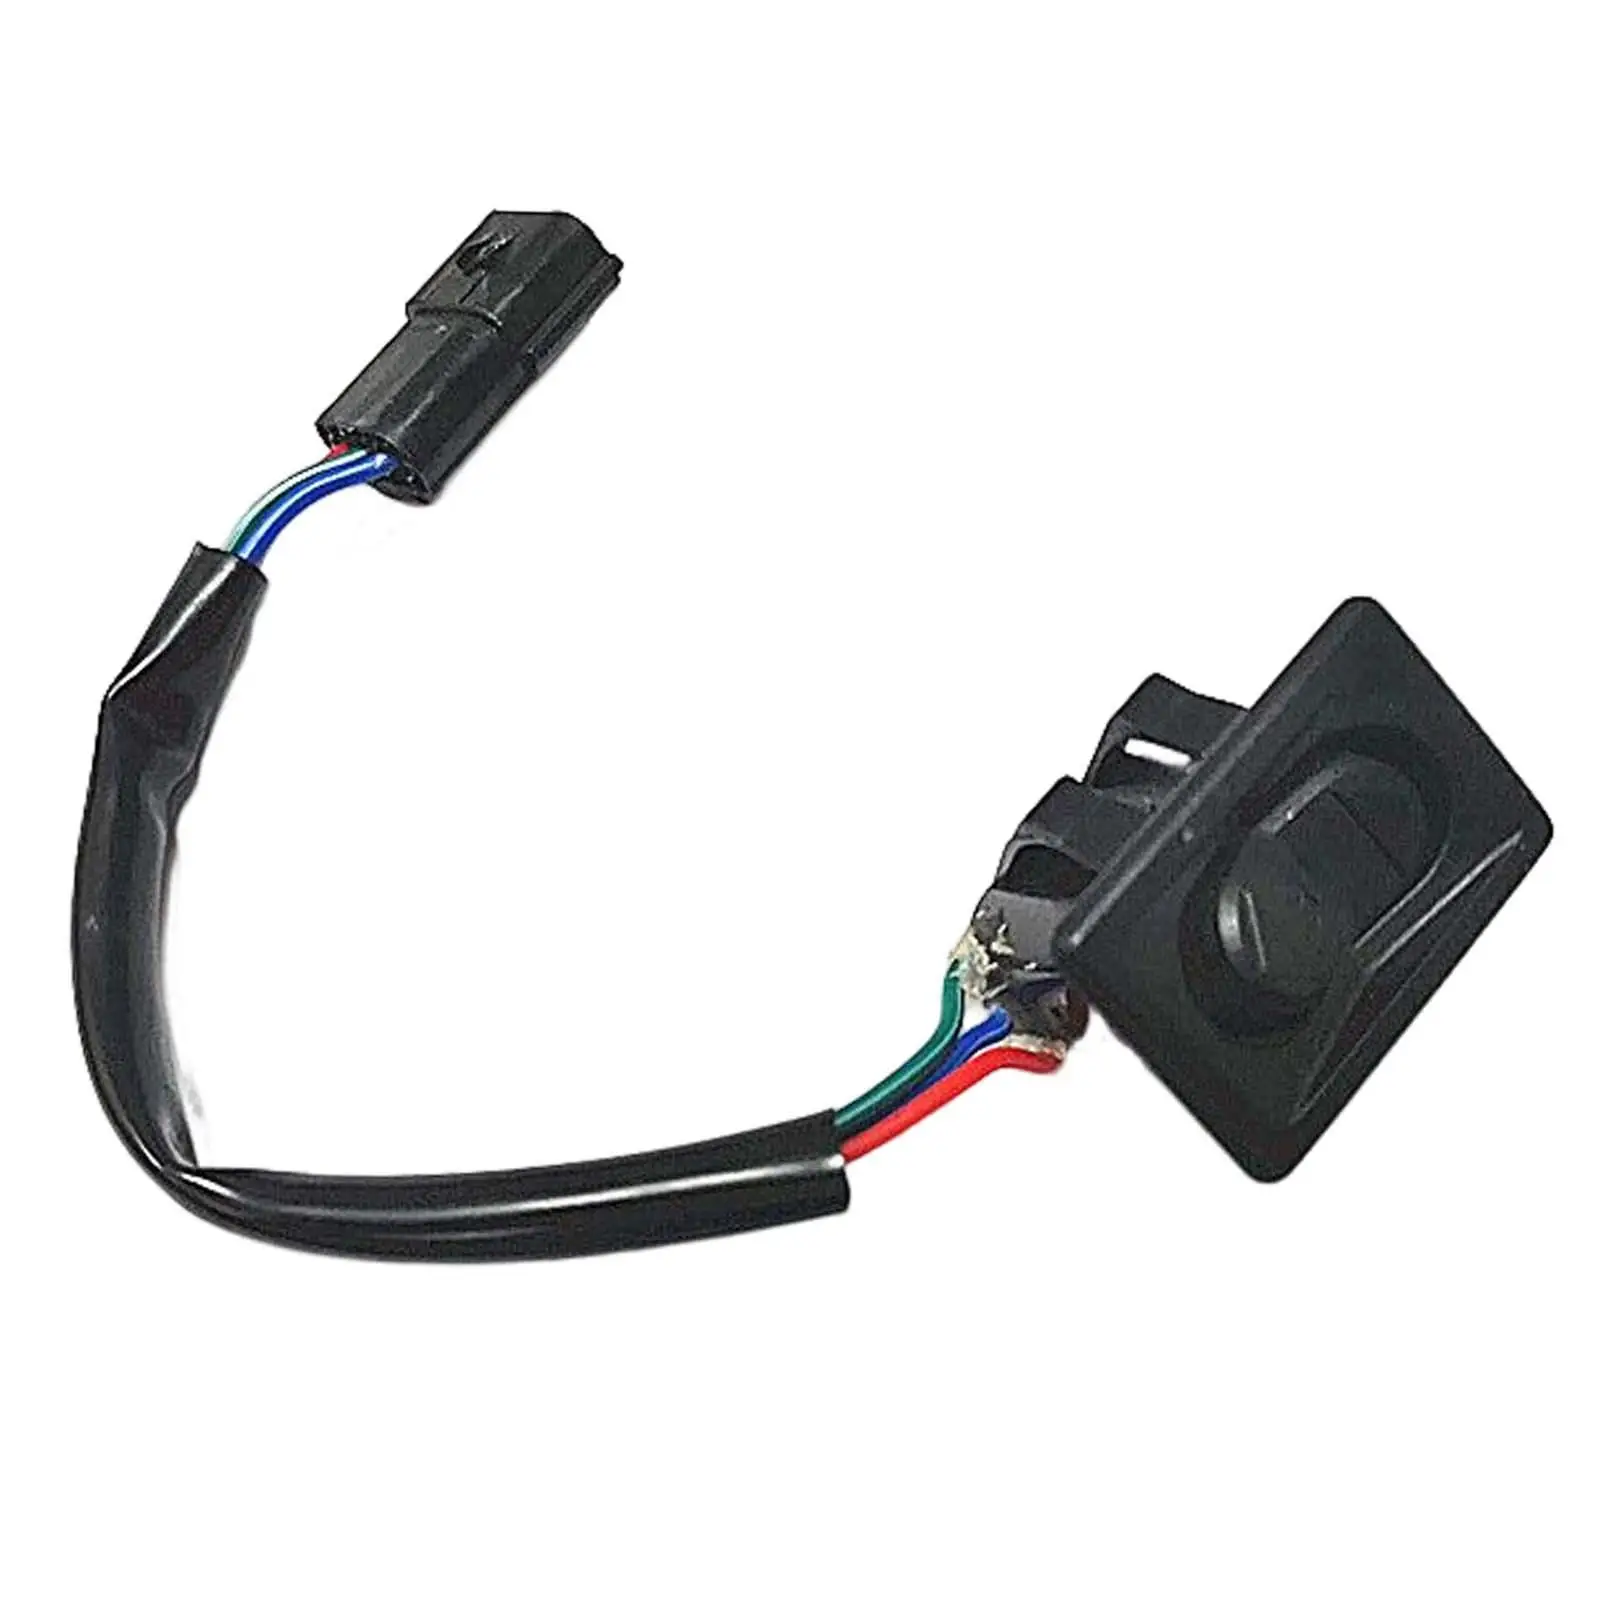 

Trim Tilt Switch 87-896620001 Easily Install Replacement 12inch Long Professional